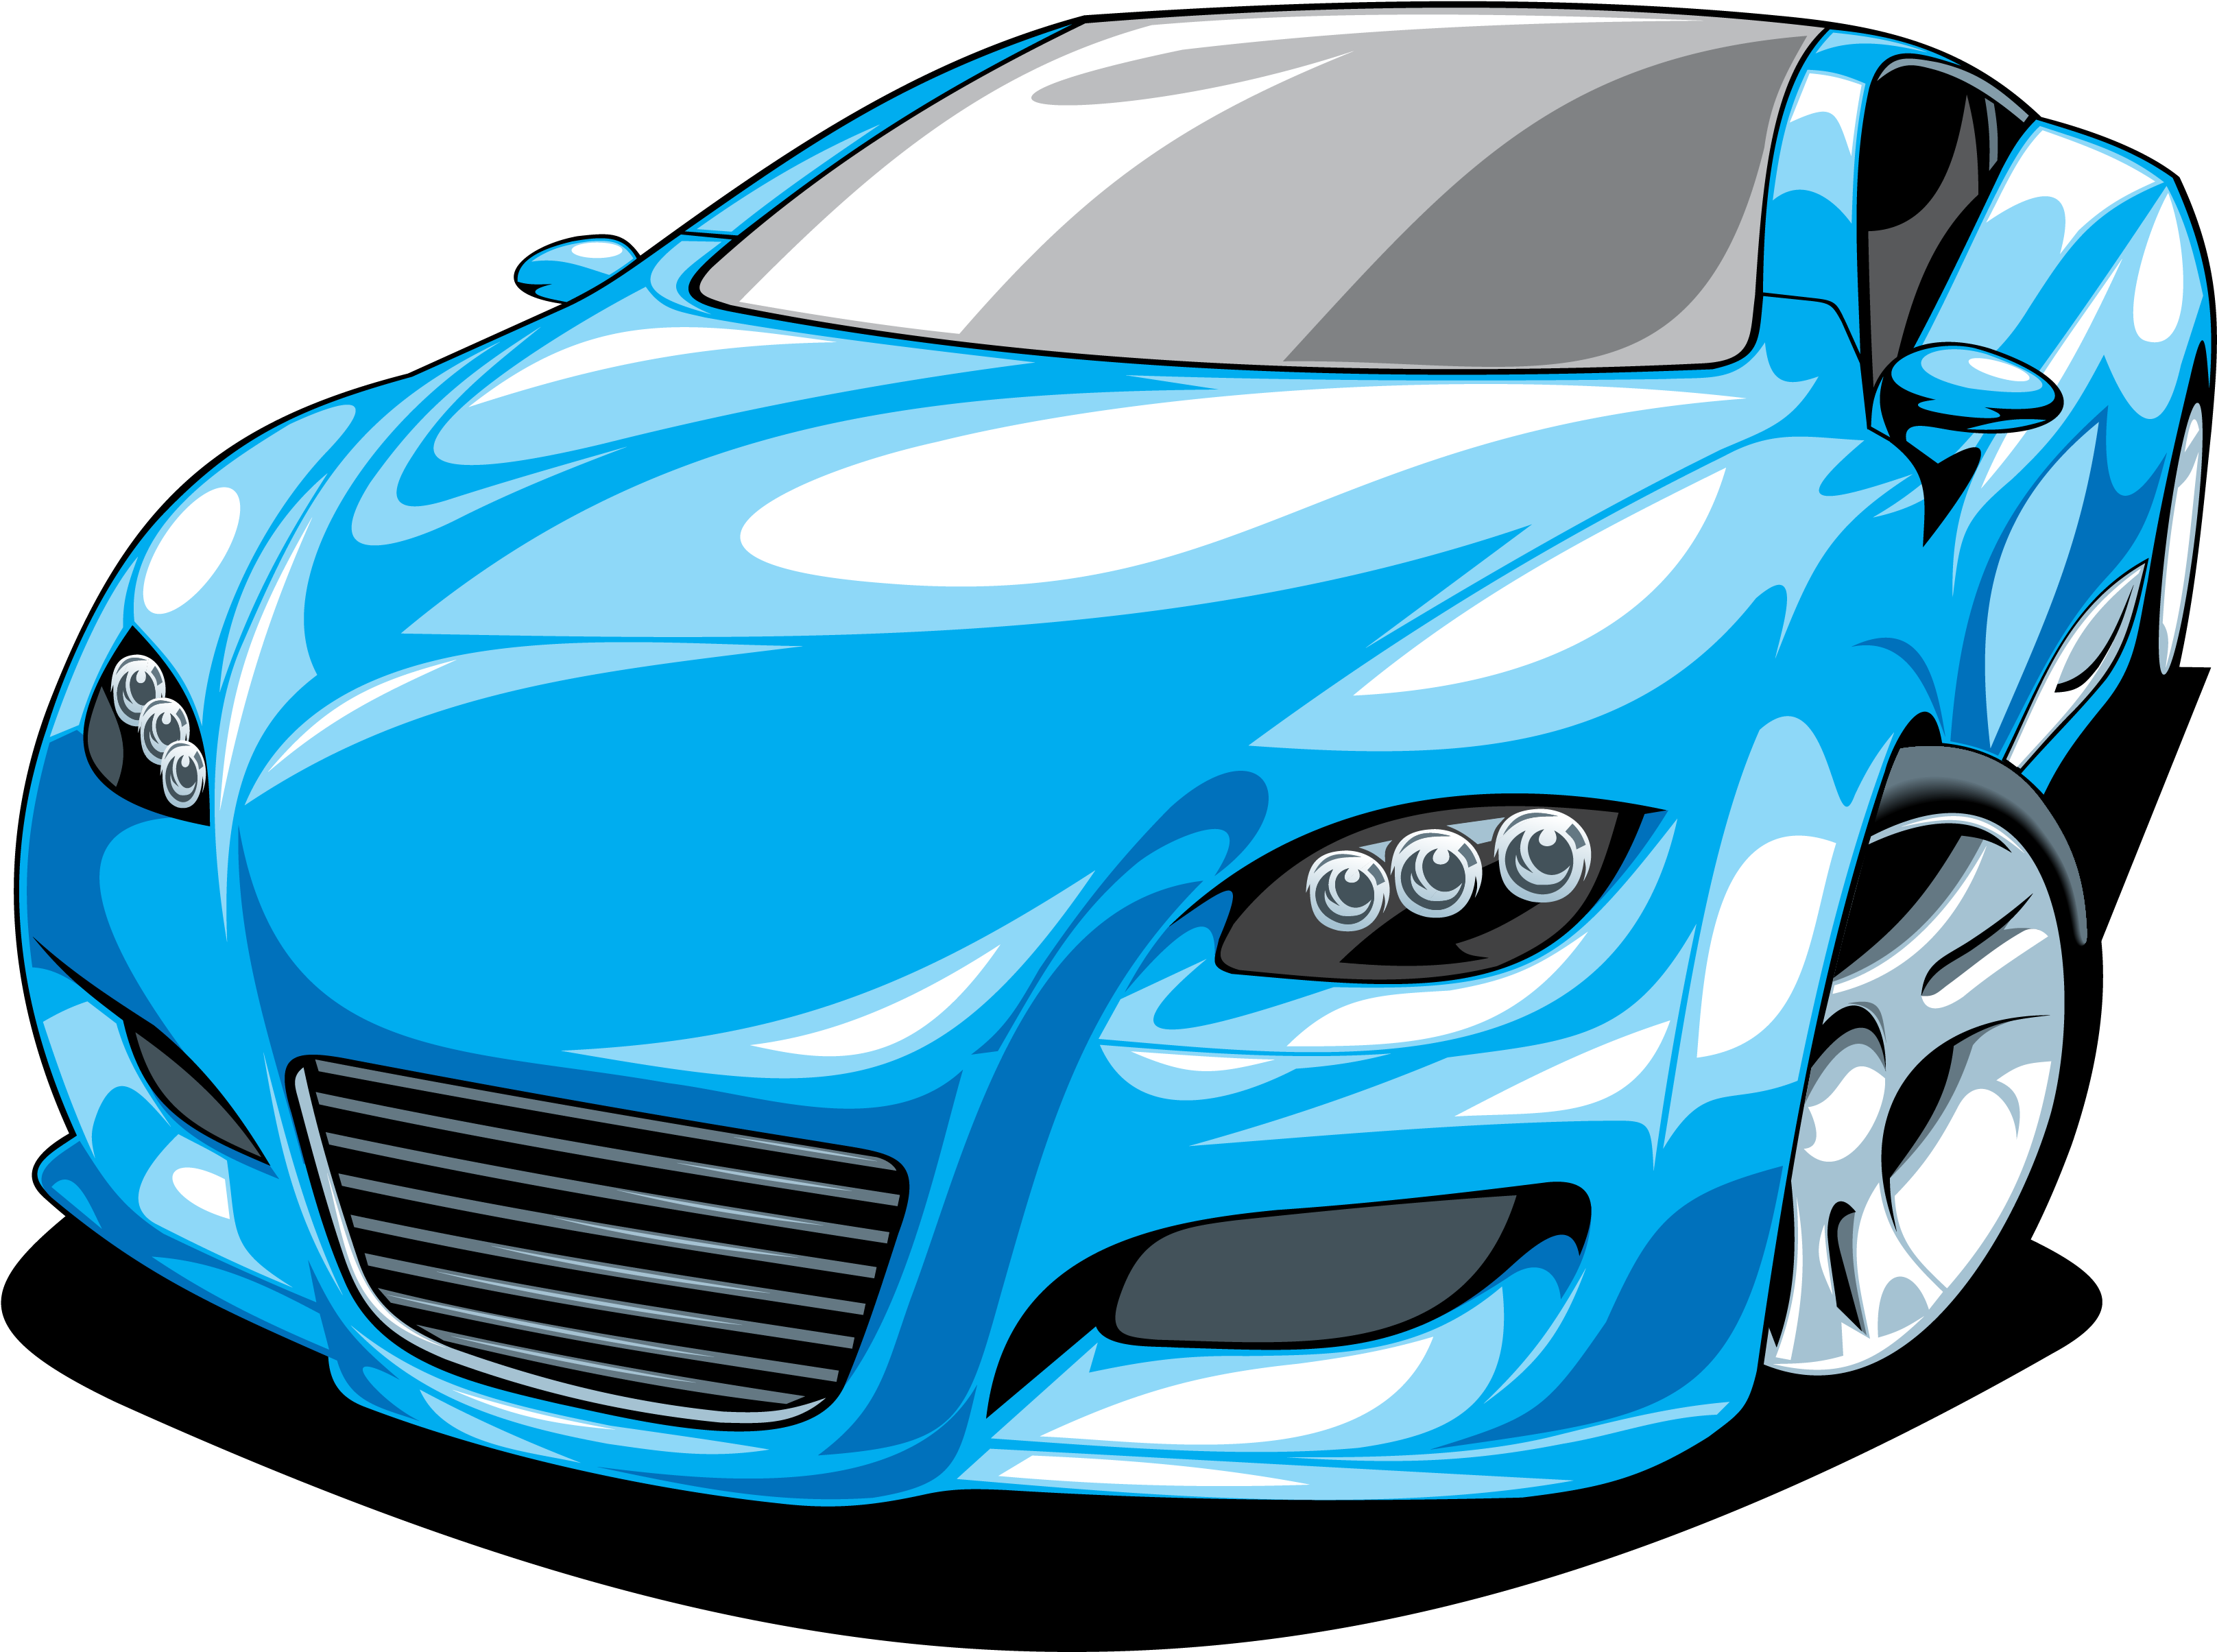 Download and share clipart about Sports Car Ferrari Clip Art - Best Luxury ...